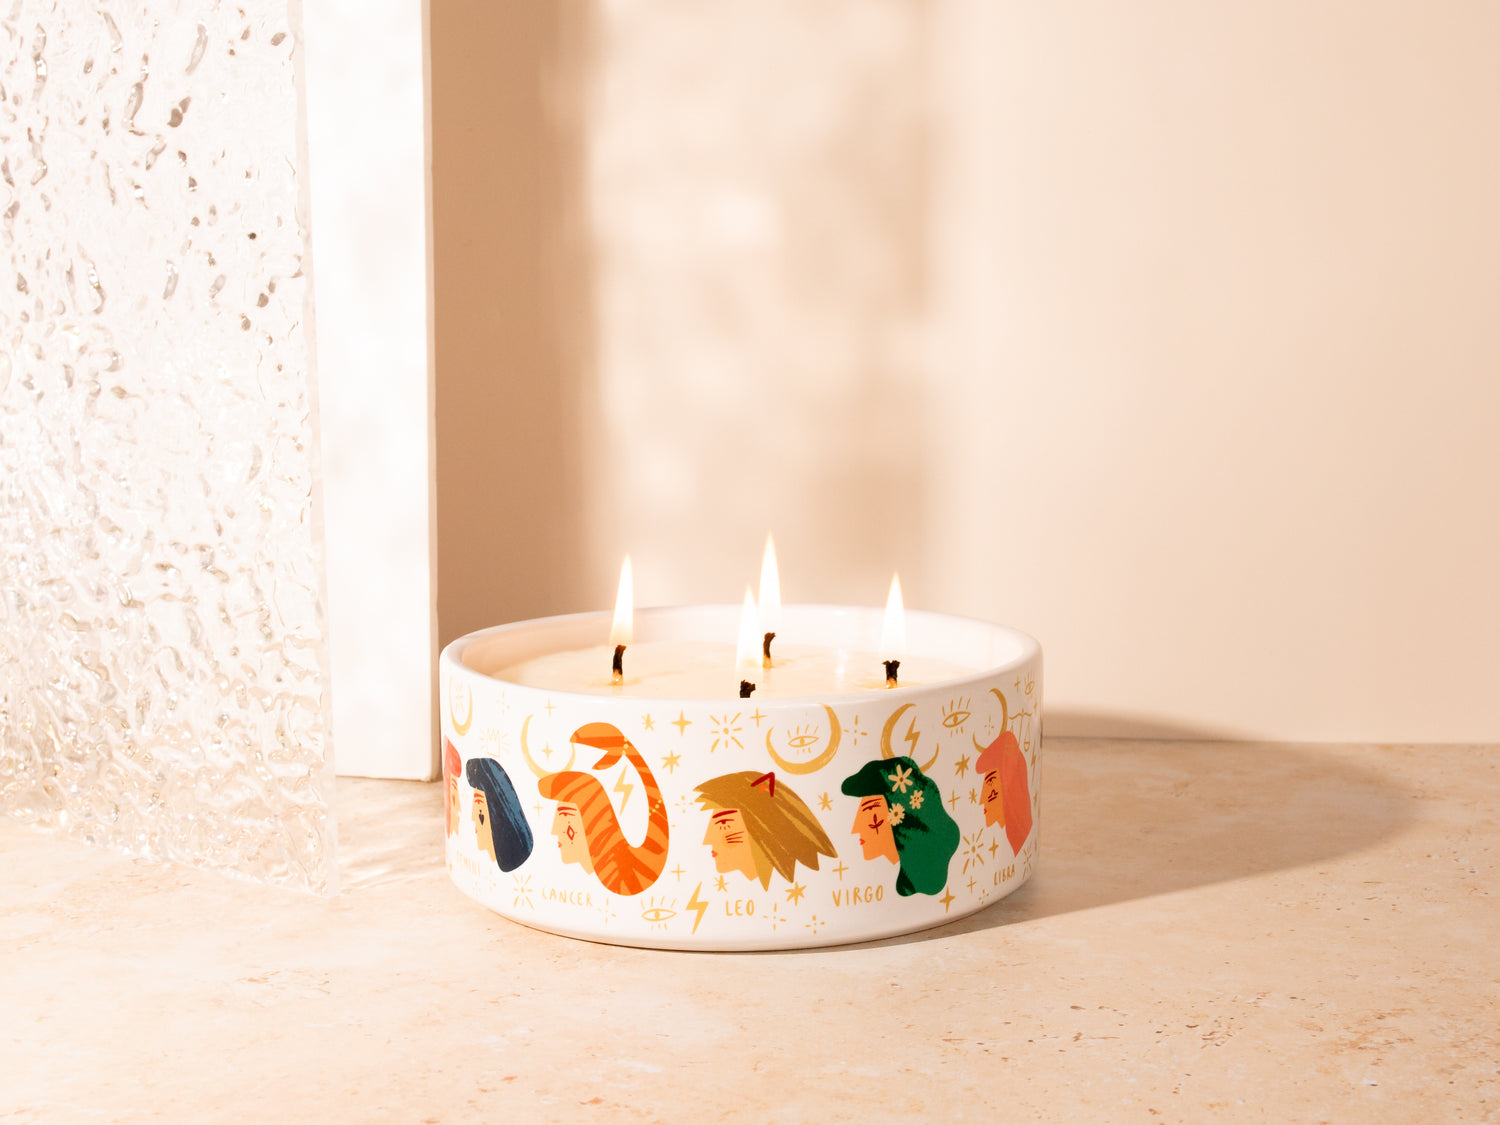 Big Scented Candle Four Wick in Designed Ceramic Vessel featuring Zodiac Sign Women Inspired Paintings 